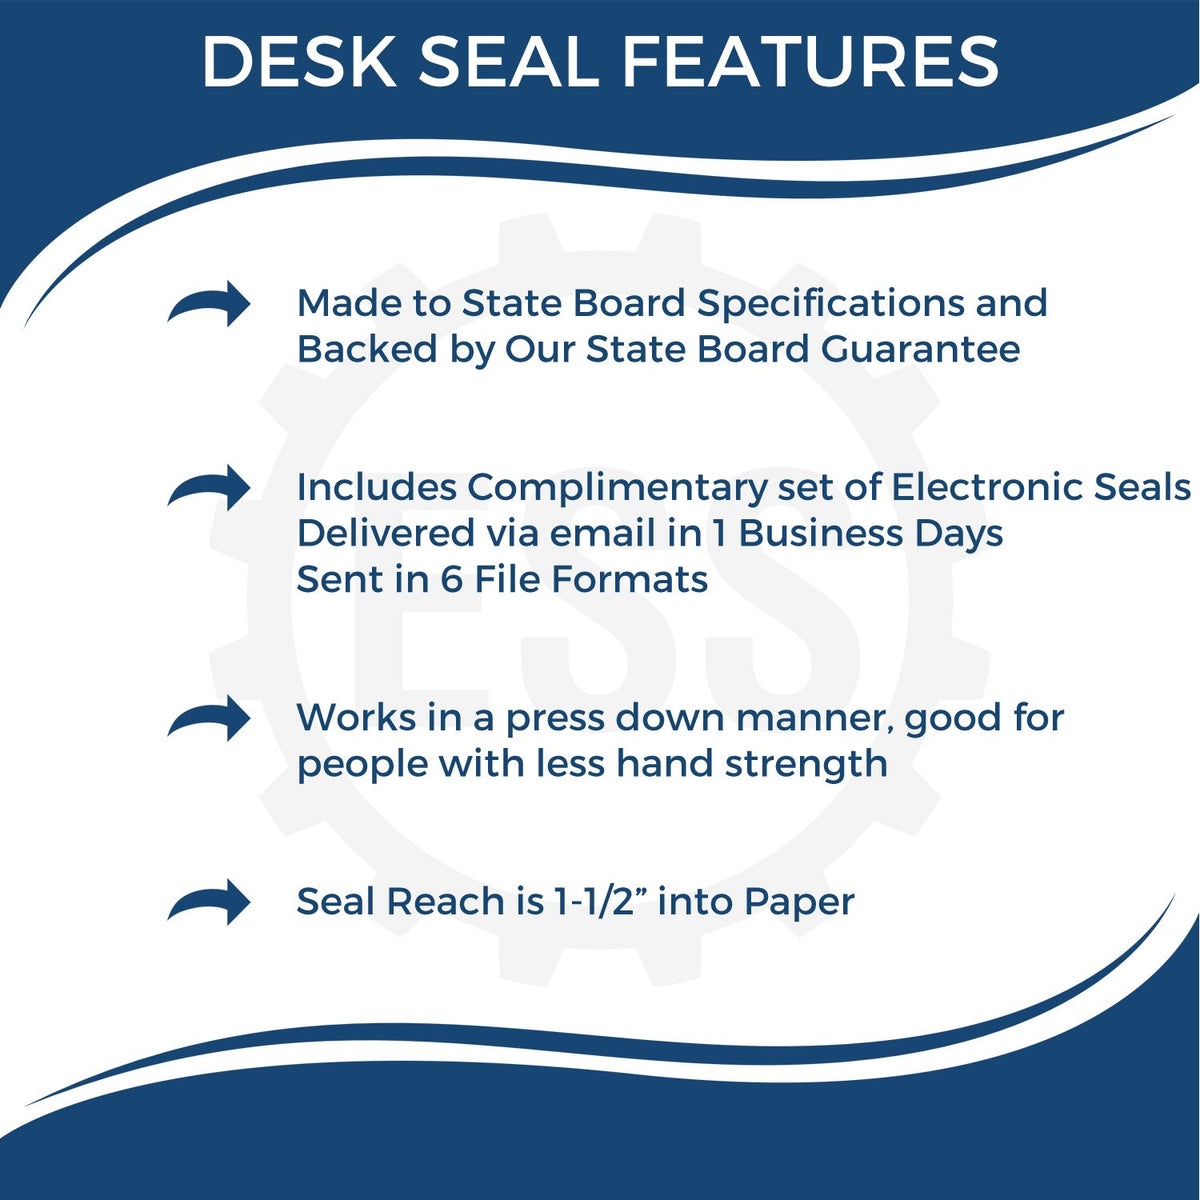 A picture of an infographic highlighting the selling points for the Missouri Desk Surveyor Seal Embosser